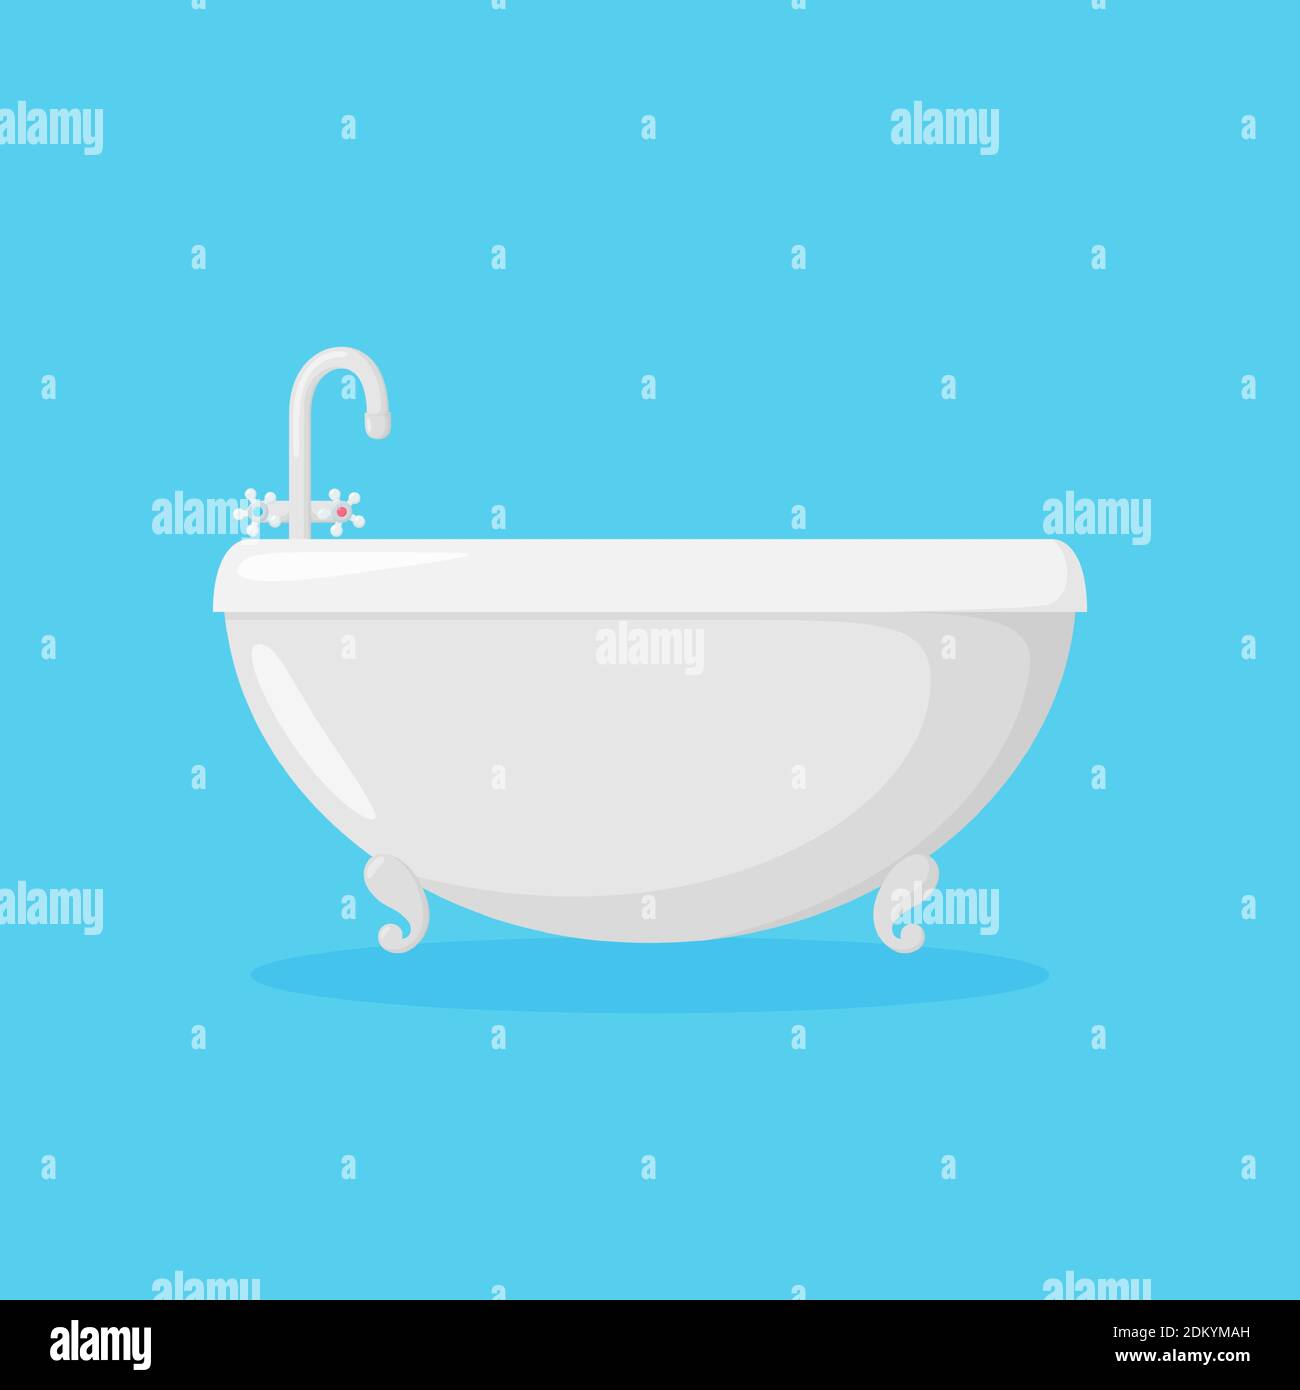 Bathtub for bathroom with faucet. Side view of whitehite ellipse tub with tap isolated in blue background. Vector illustration in cartoon style Stock Vector